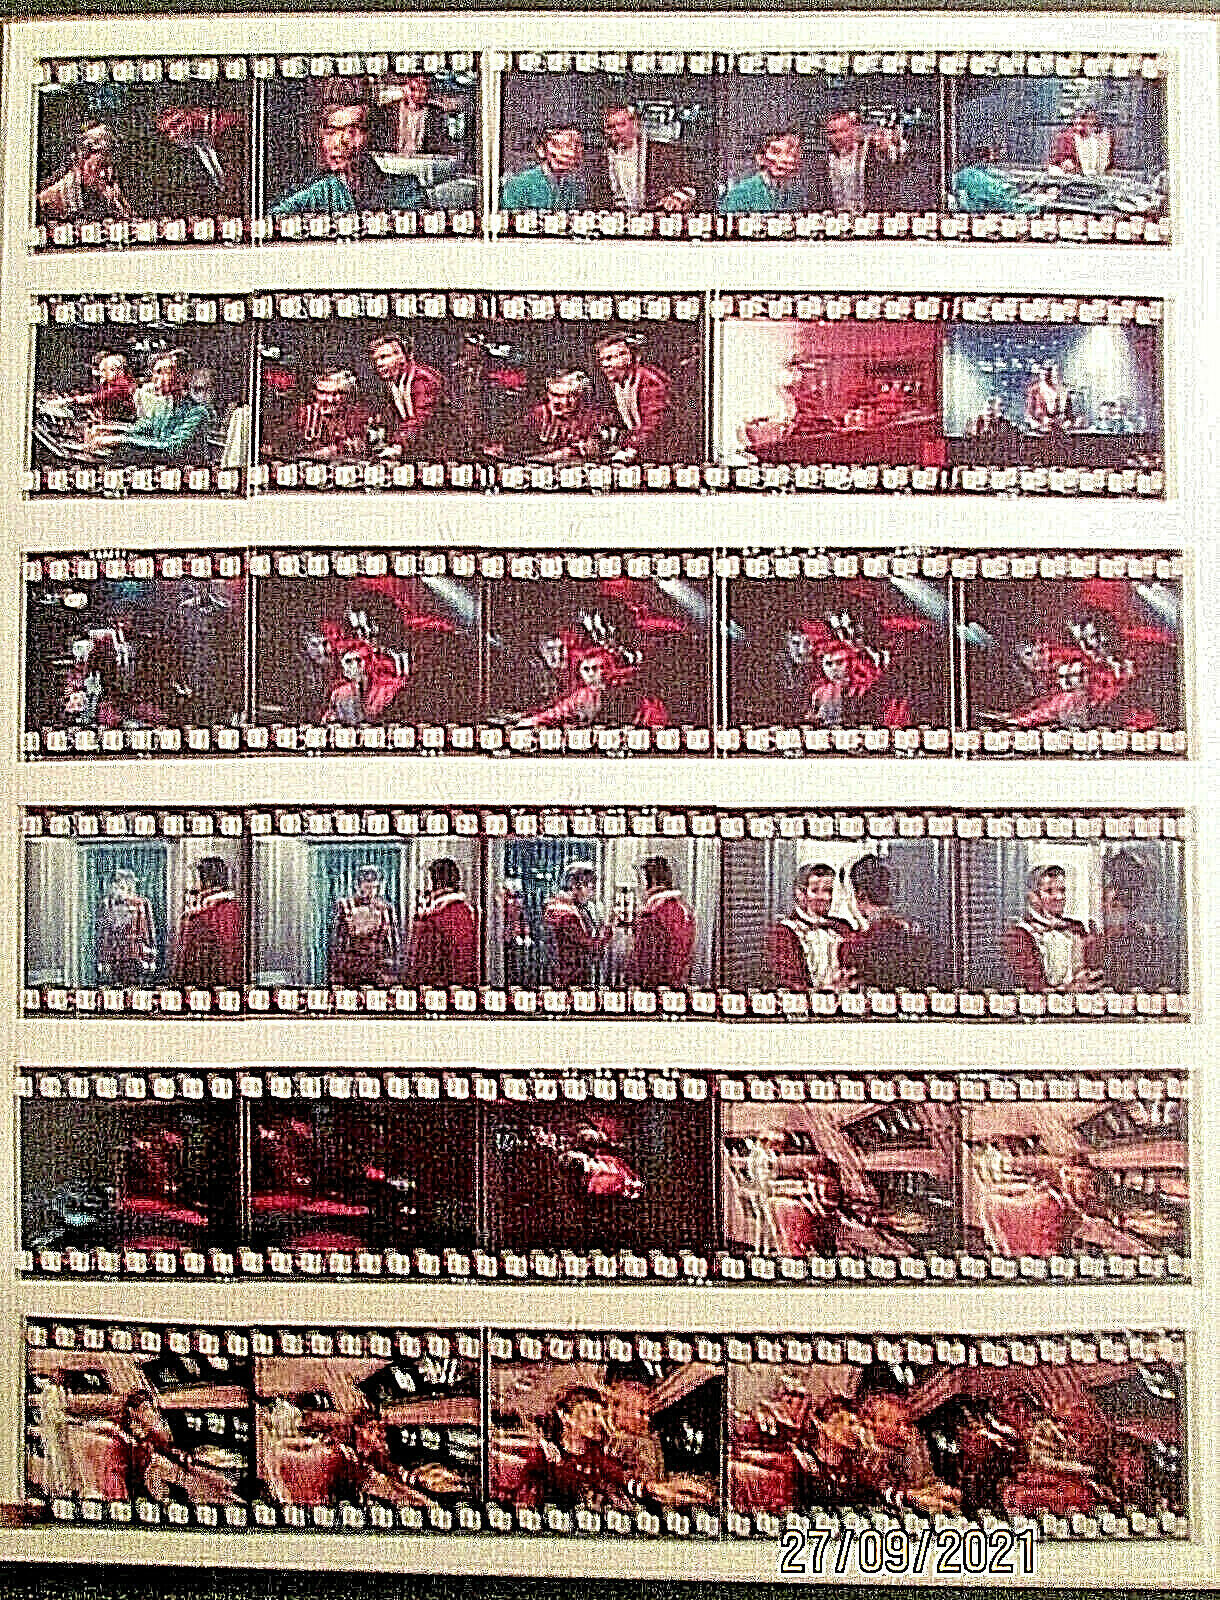 STAR TREK III : (THE SEARCH FOR SPOCK) ORIG,1984 COLOR CONTACT SHEET Photo Poster painting *